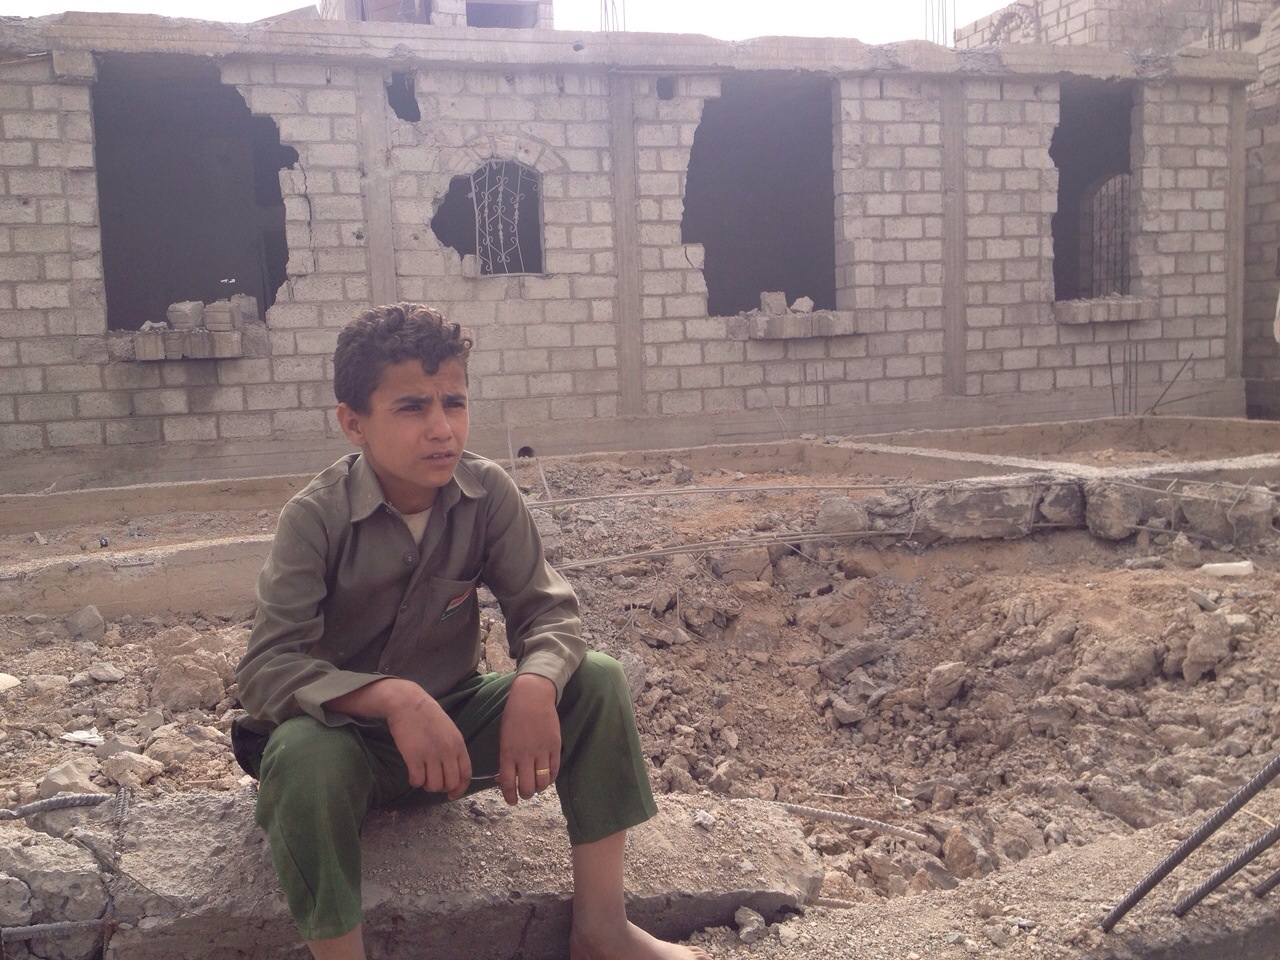 A young boy, who was luckily in school during the aerial attack by Saudi-led forces, sits outside his home on debris.r, 90KM south of Sanaa the capital of Yemen, in the afternoon hours on Tuesday, April 14, 2015.